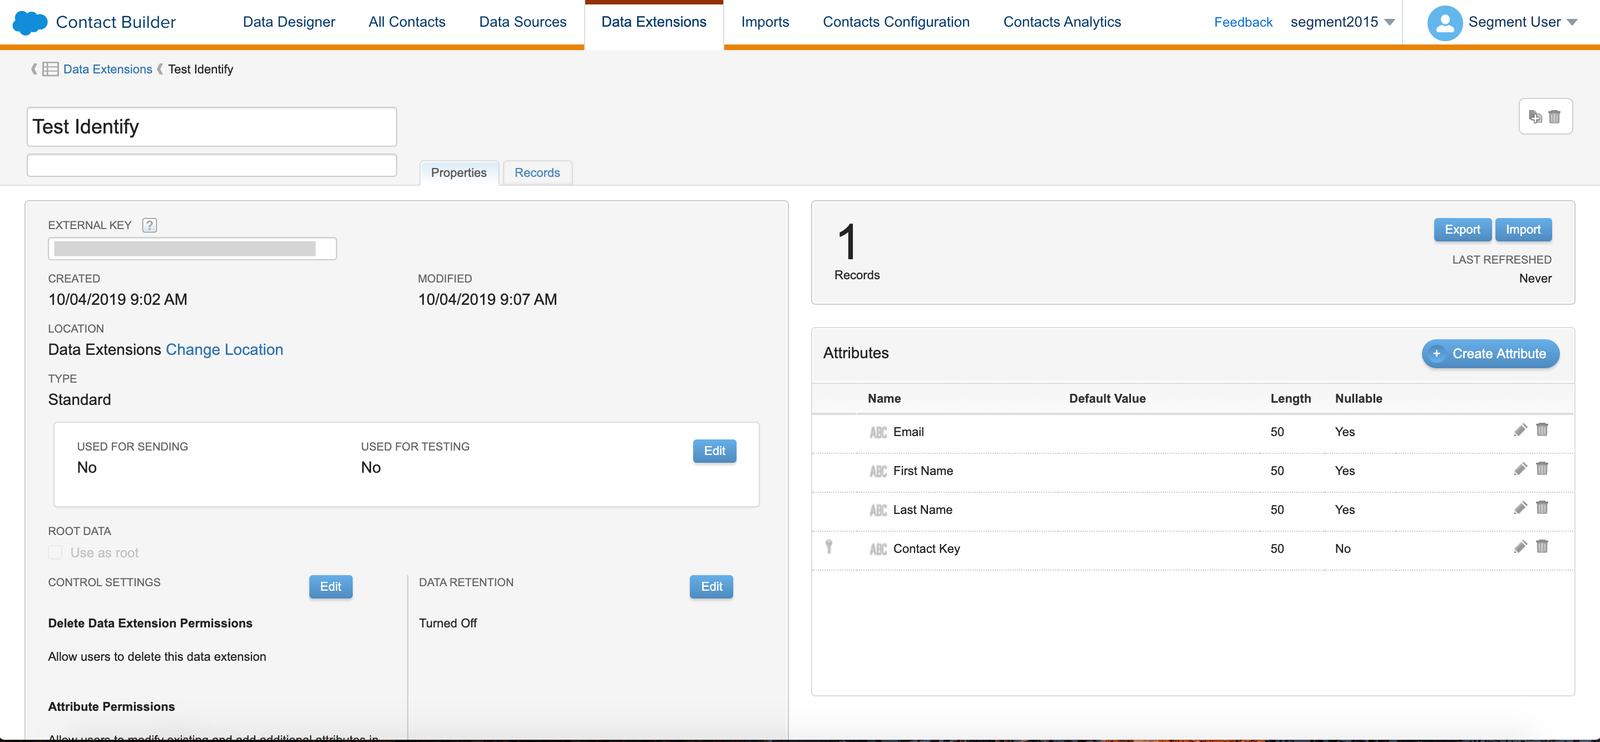 A screenshot of the SFMC Contact Builder, with a Test Identify call on the Data Extensions page.